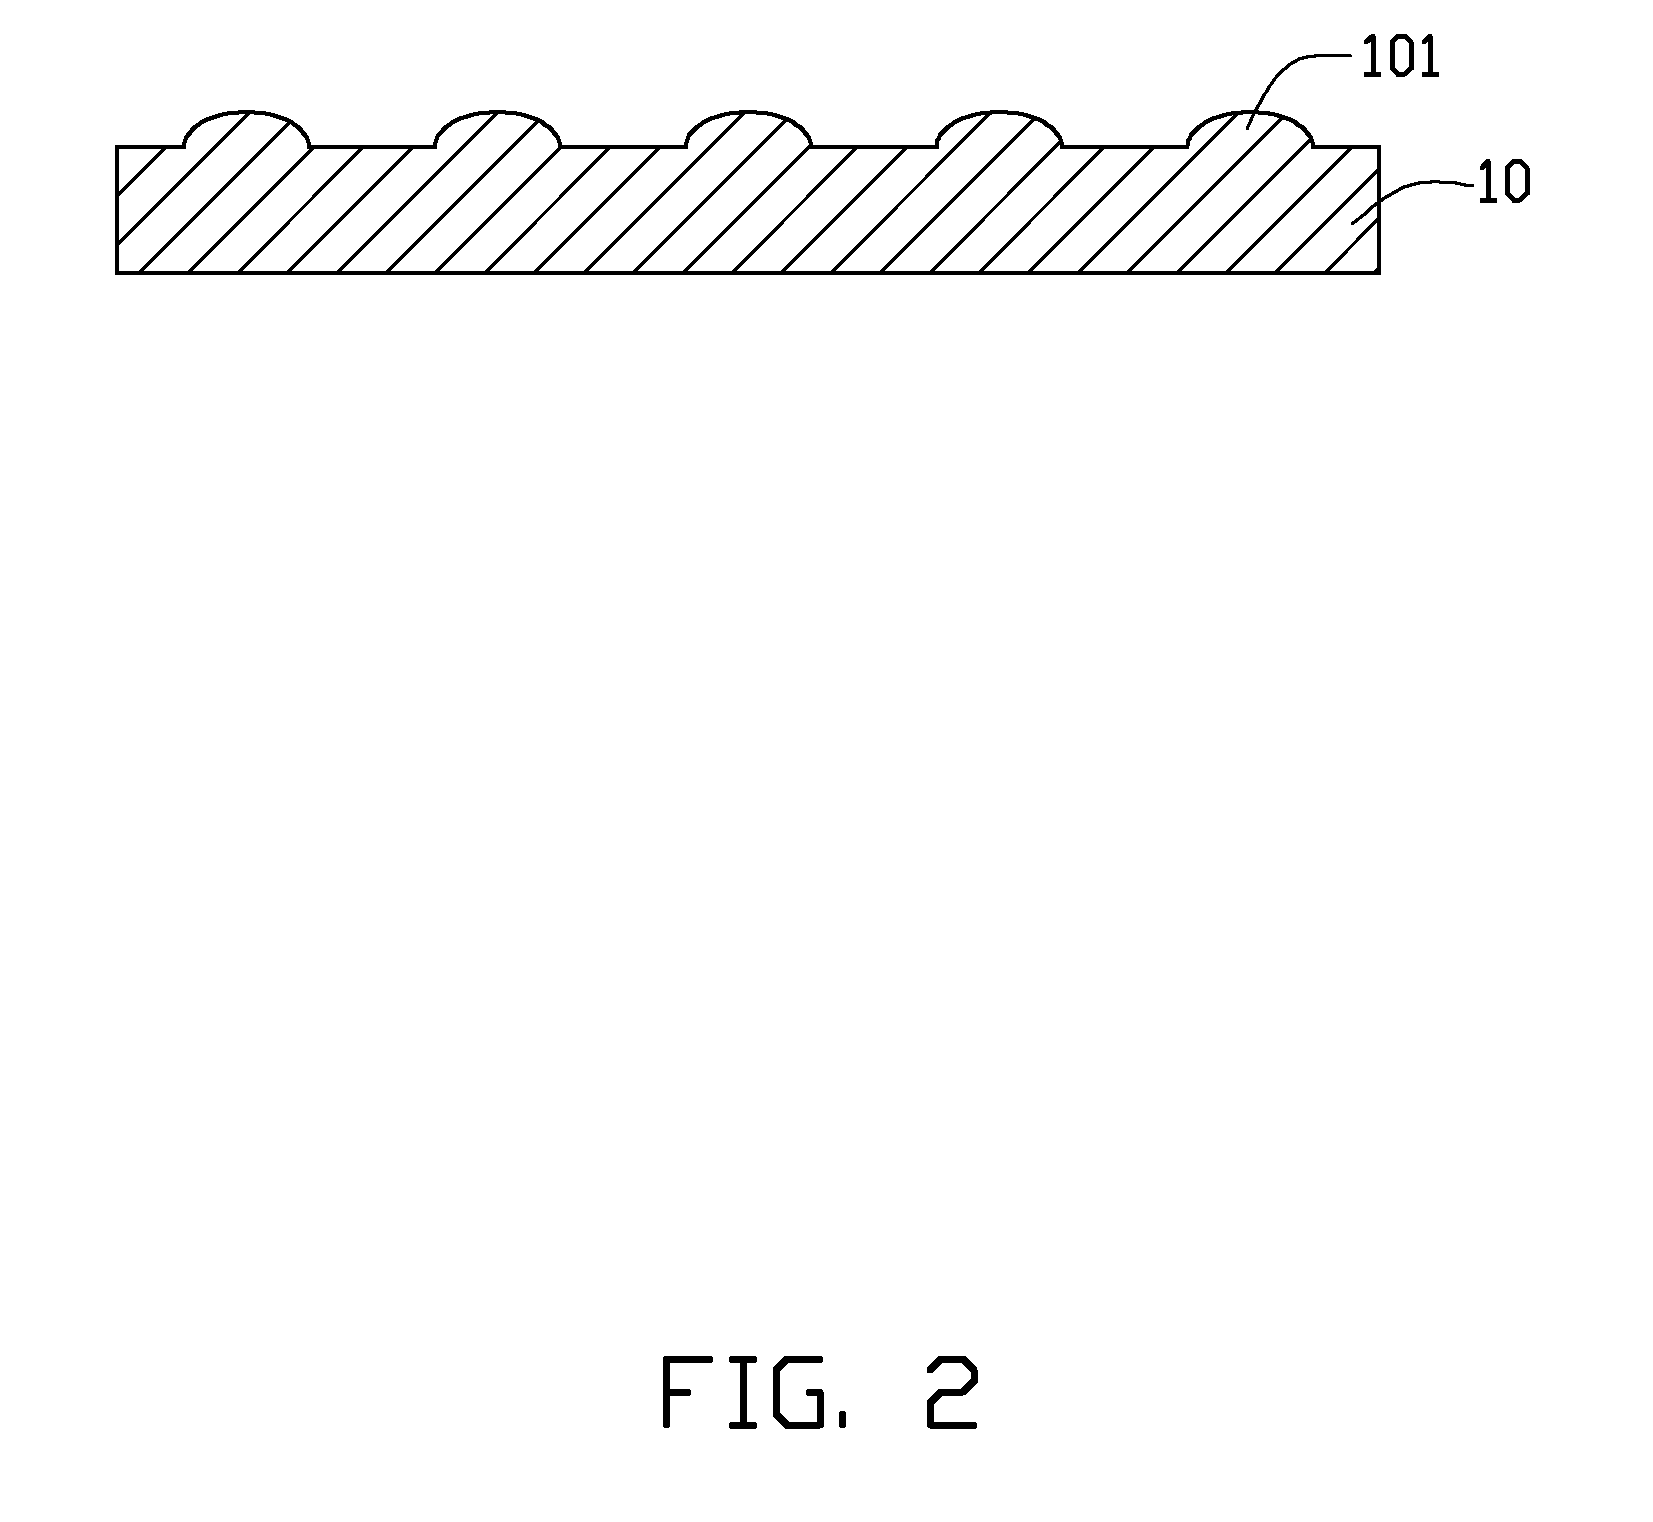 Molding stamper and method for fabricating same